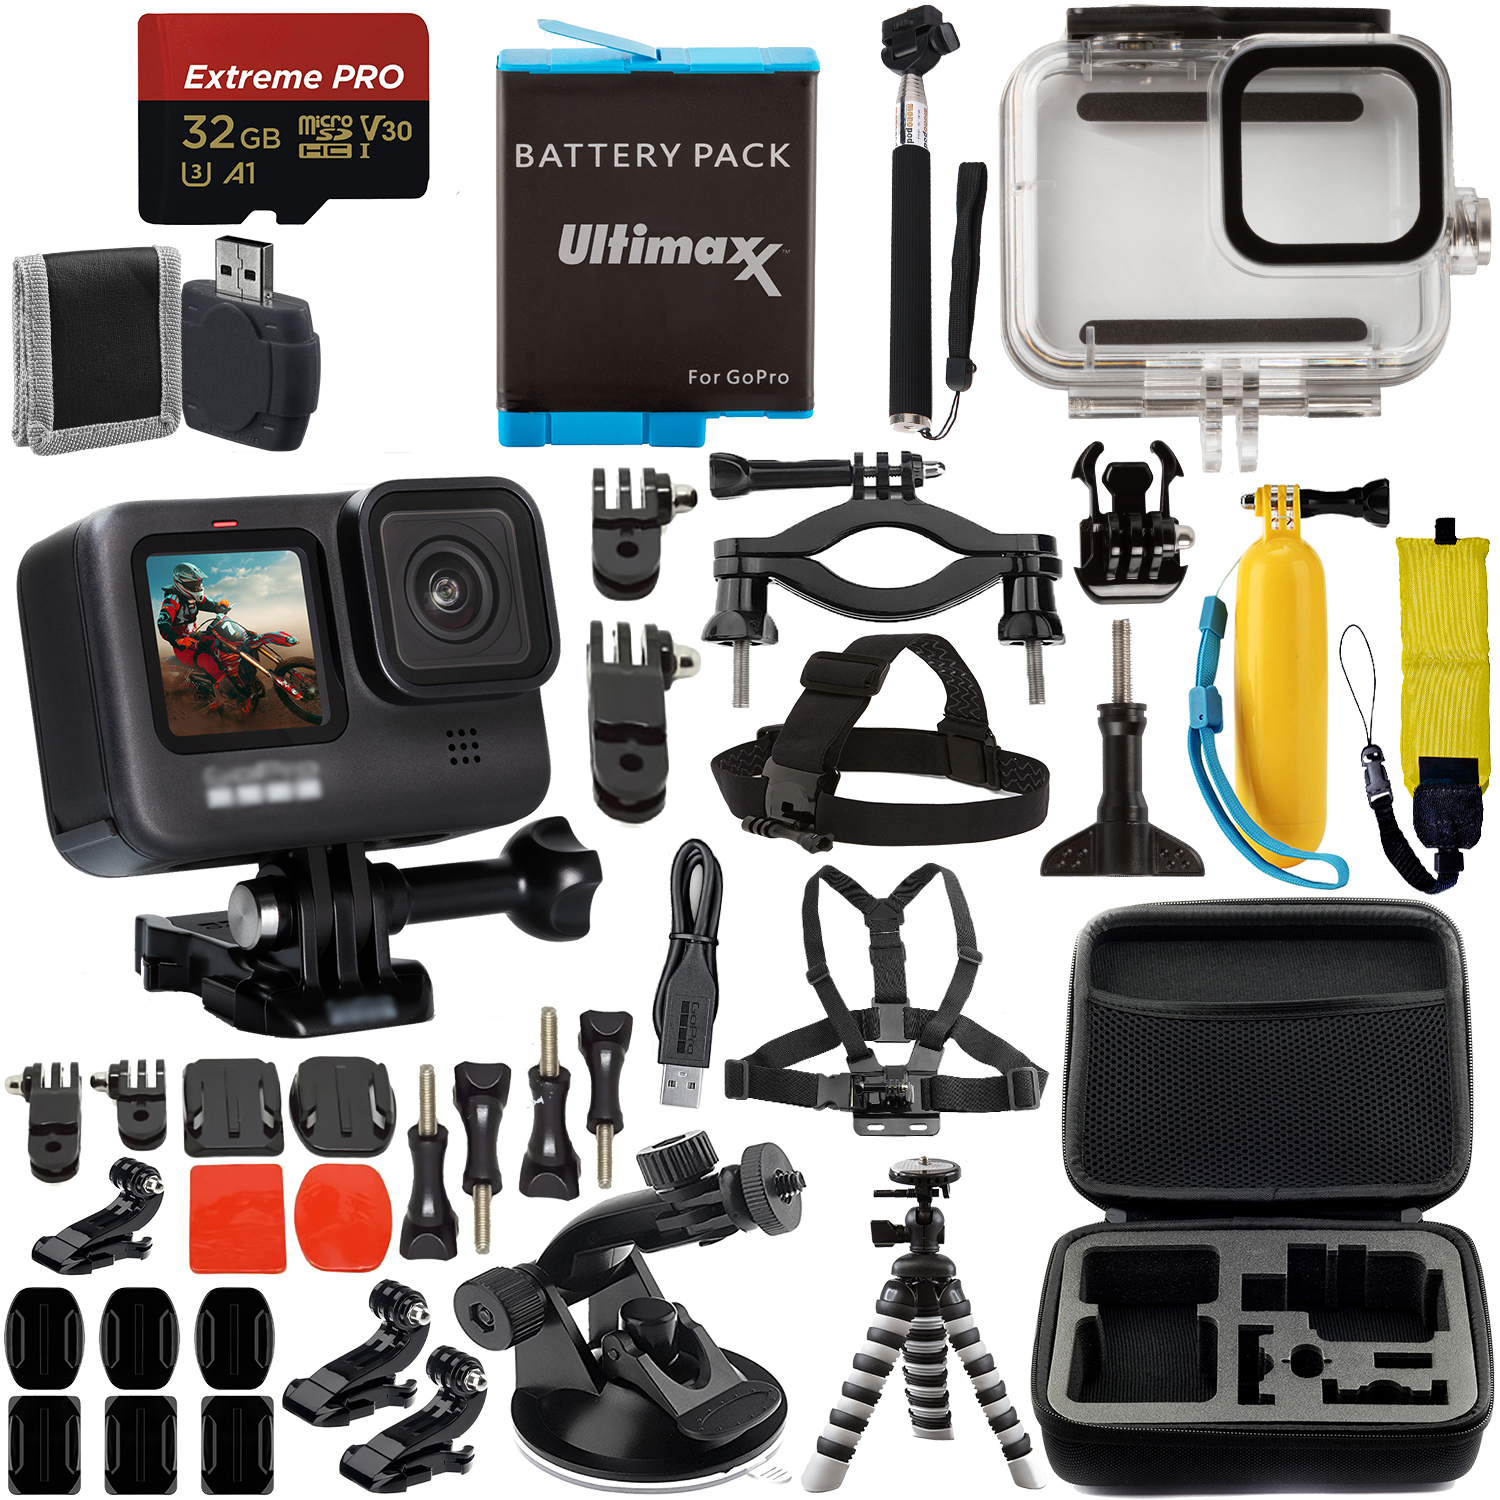 Ultimaxx Premium Hero 9 Action Camera (Black) Bundle - Includes: 32GB Extreme Pro micro Memory Card, Underwater Housing & Much More (29pc Bundle) - image 1 of 8